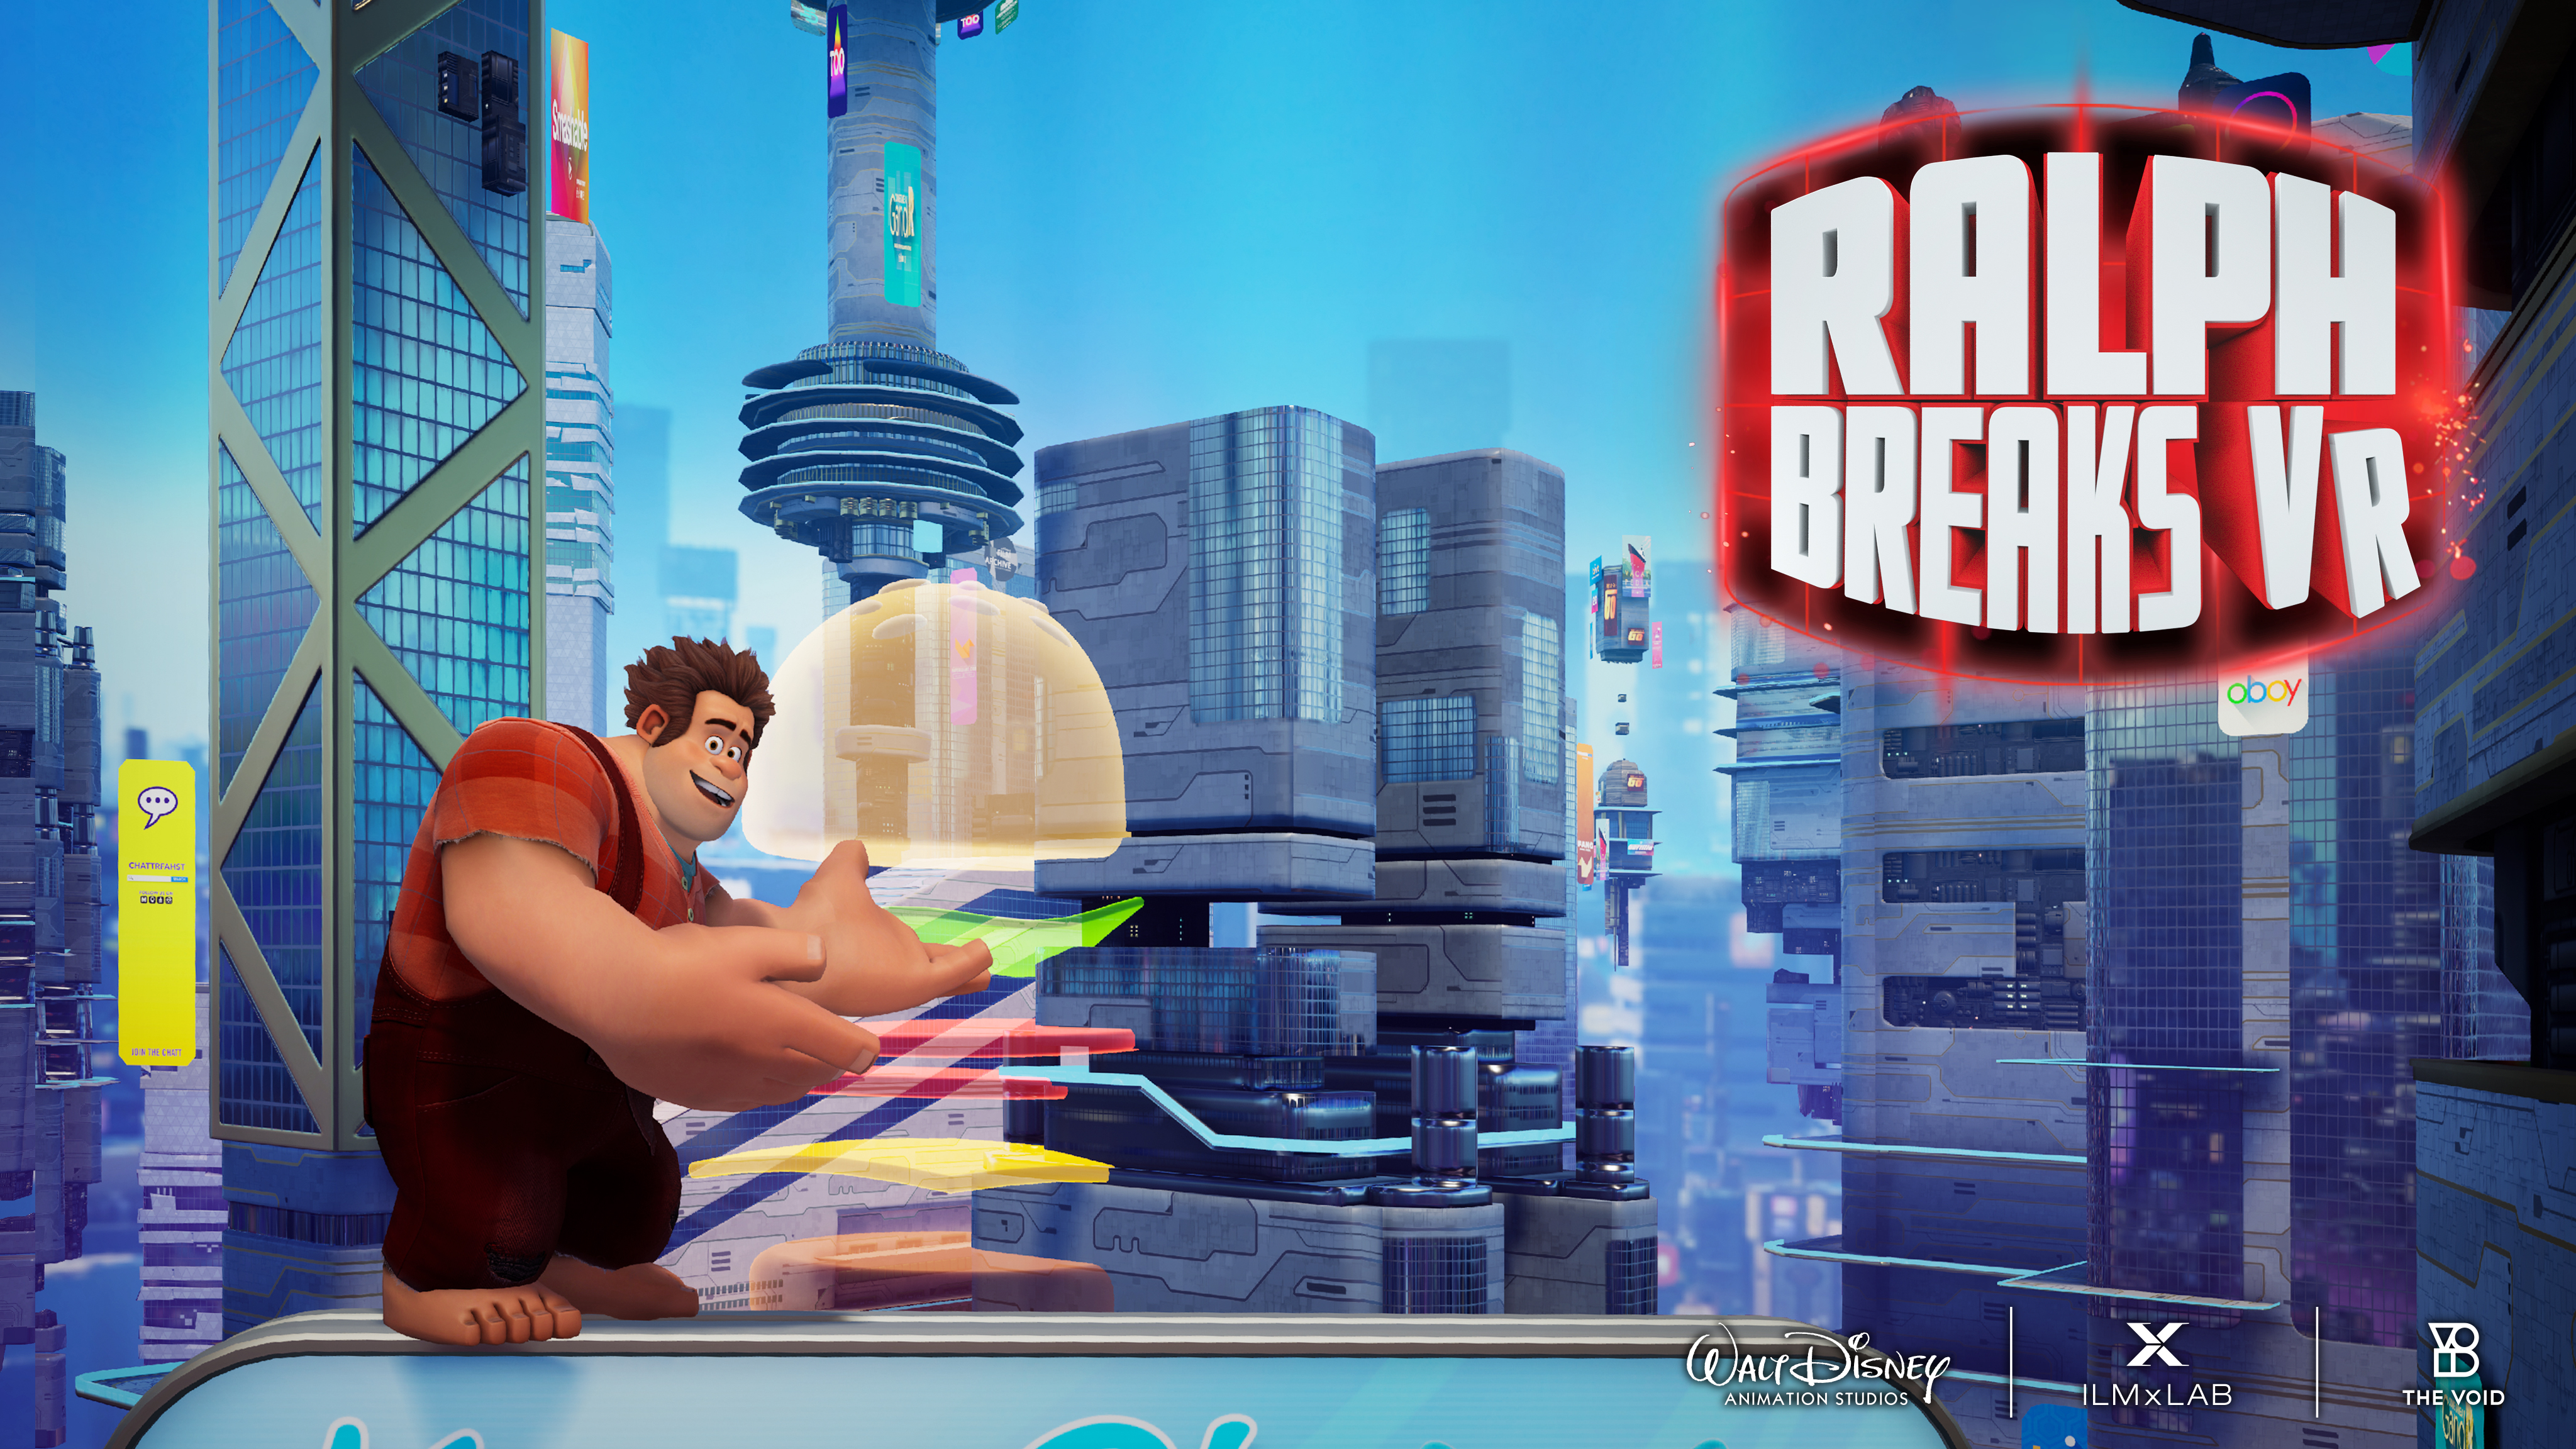 Tickets on Sale Now for Ralph Breaks VR, the Original Hyper-Reality Experience from ILMxLAB, The VOID and Walt Disney Animation Studios